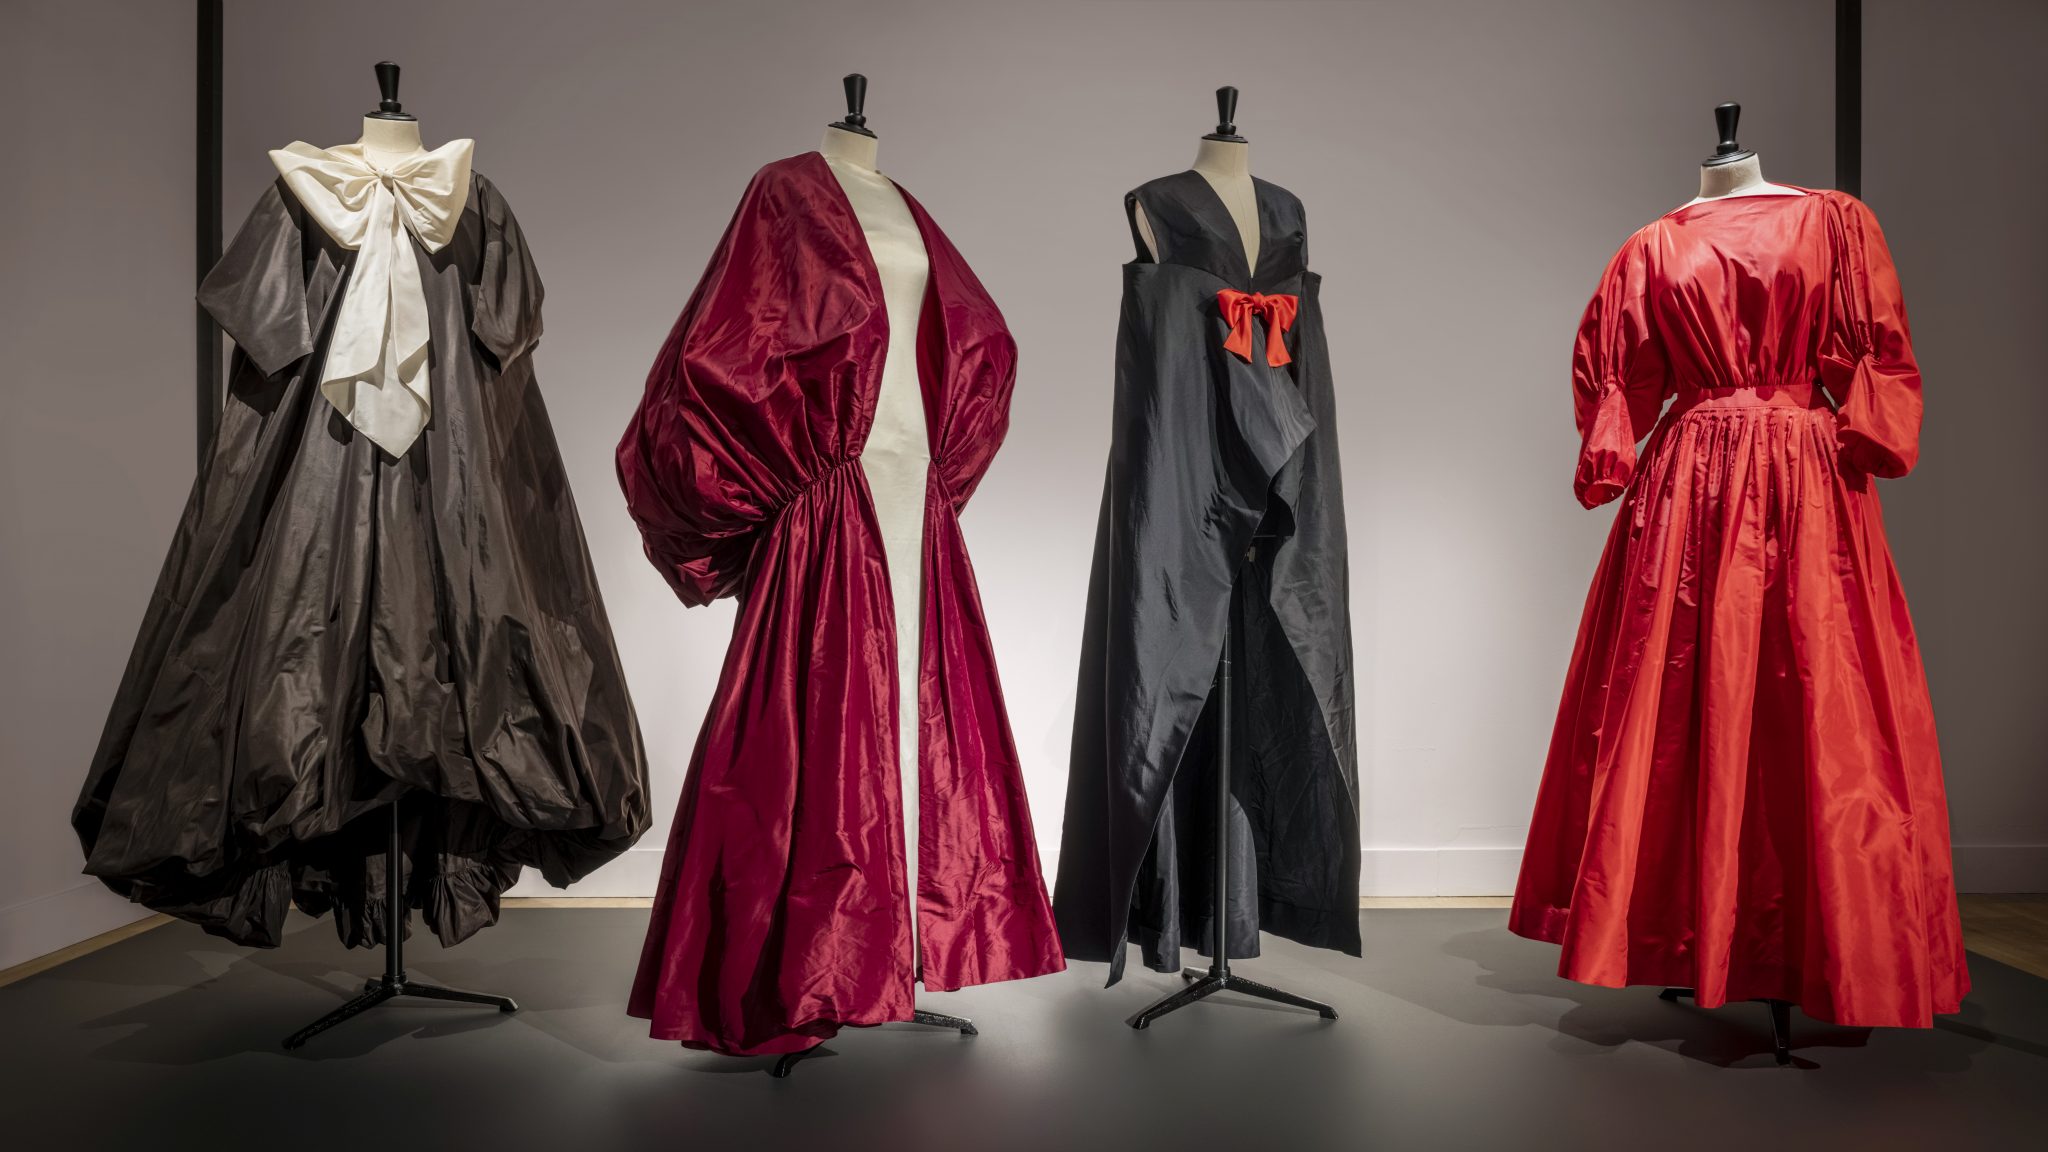 Madame Grès, The Art of Draping Exhibition | DailyArt Magazine